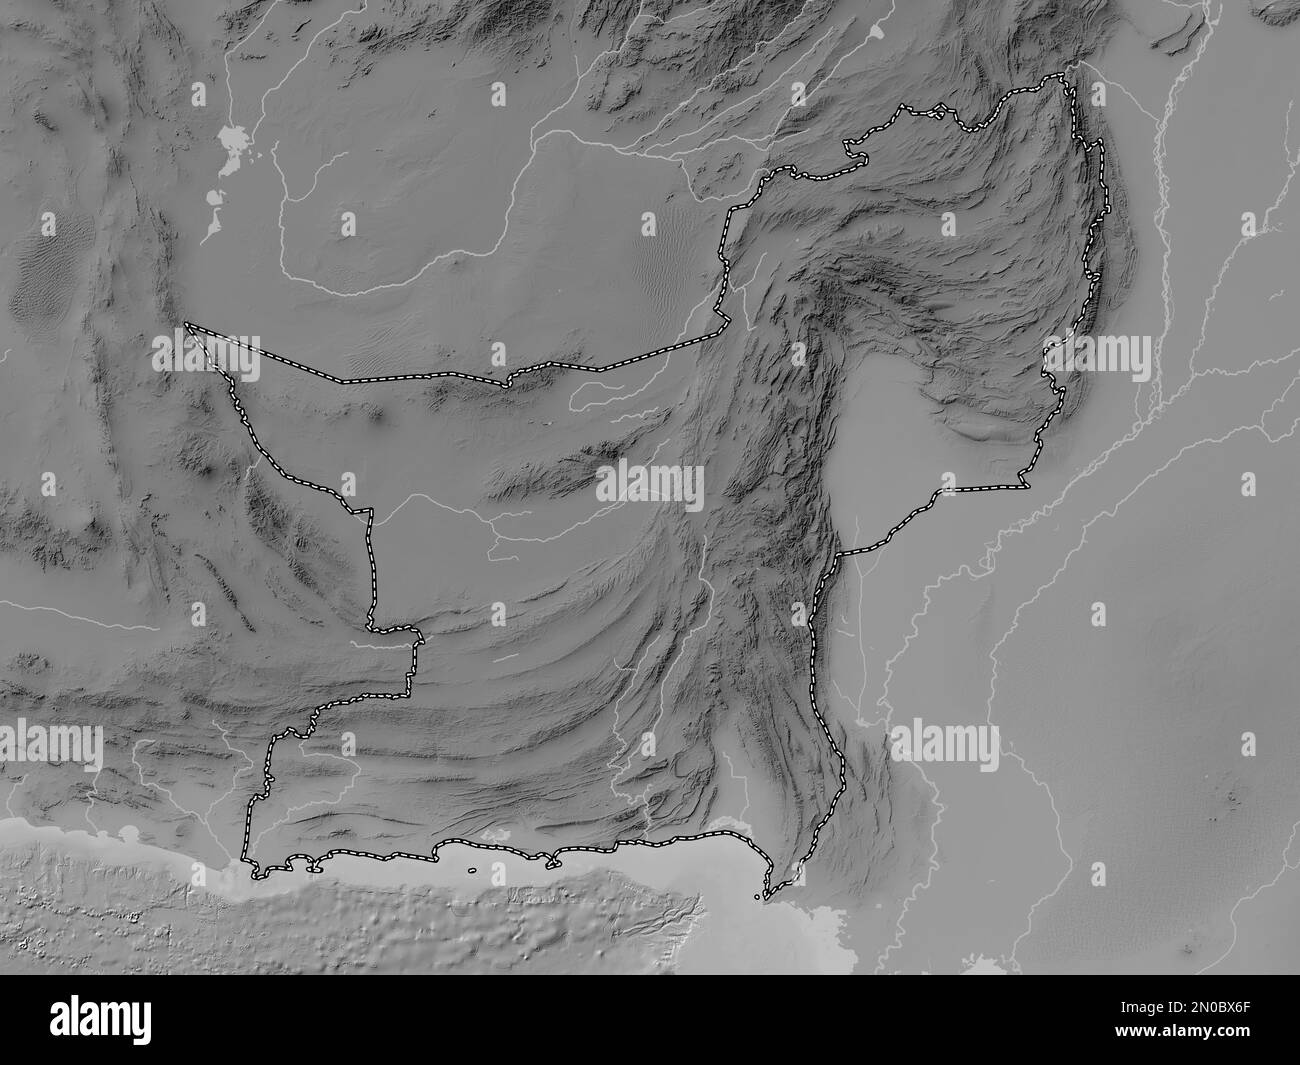 Baluchistan, province of Pakistan. Grayscale elevation map with lakes and rivers Stock Photo